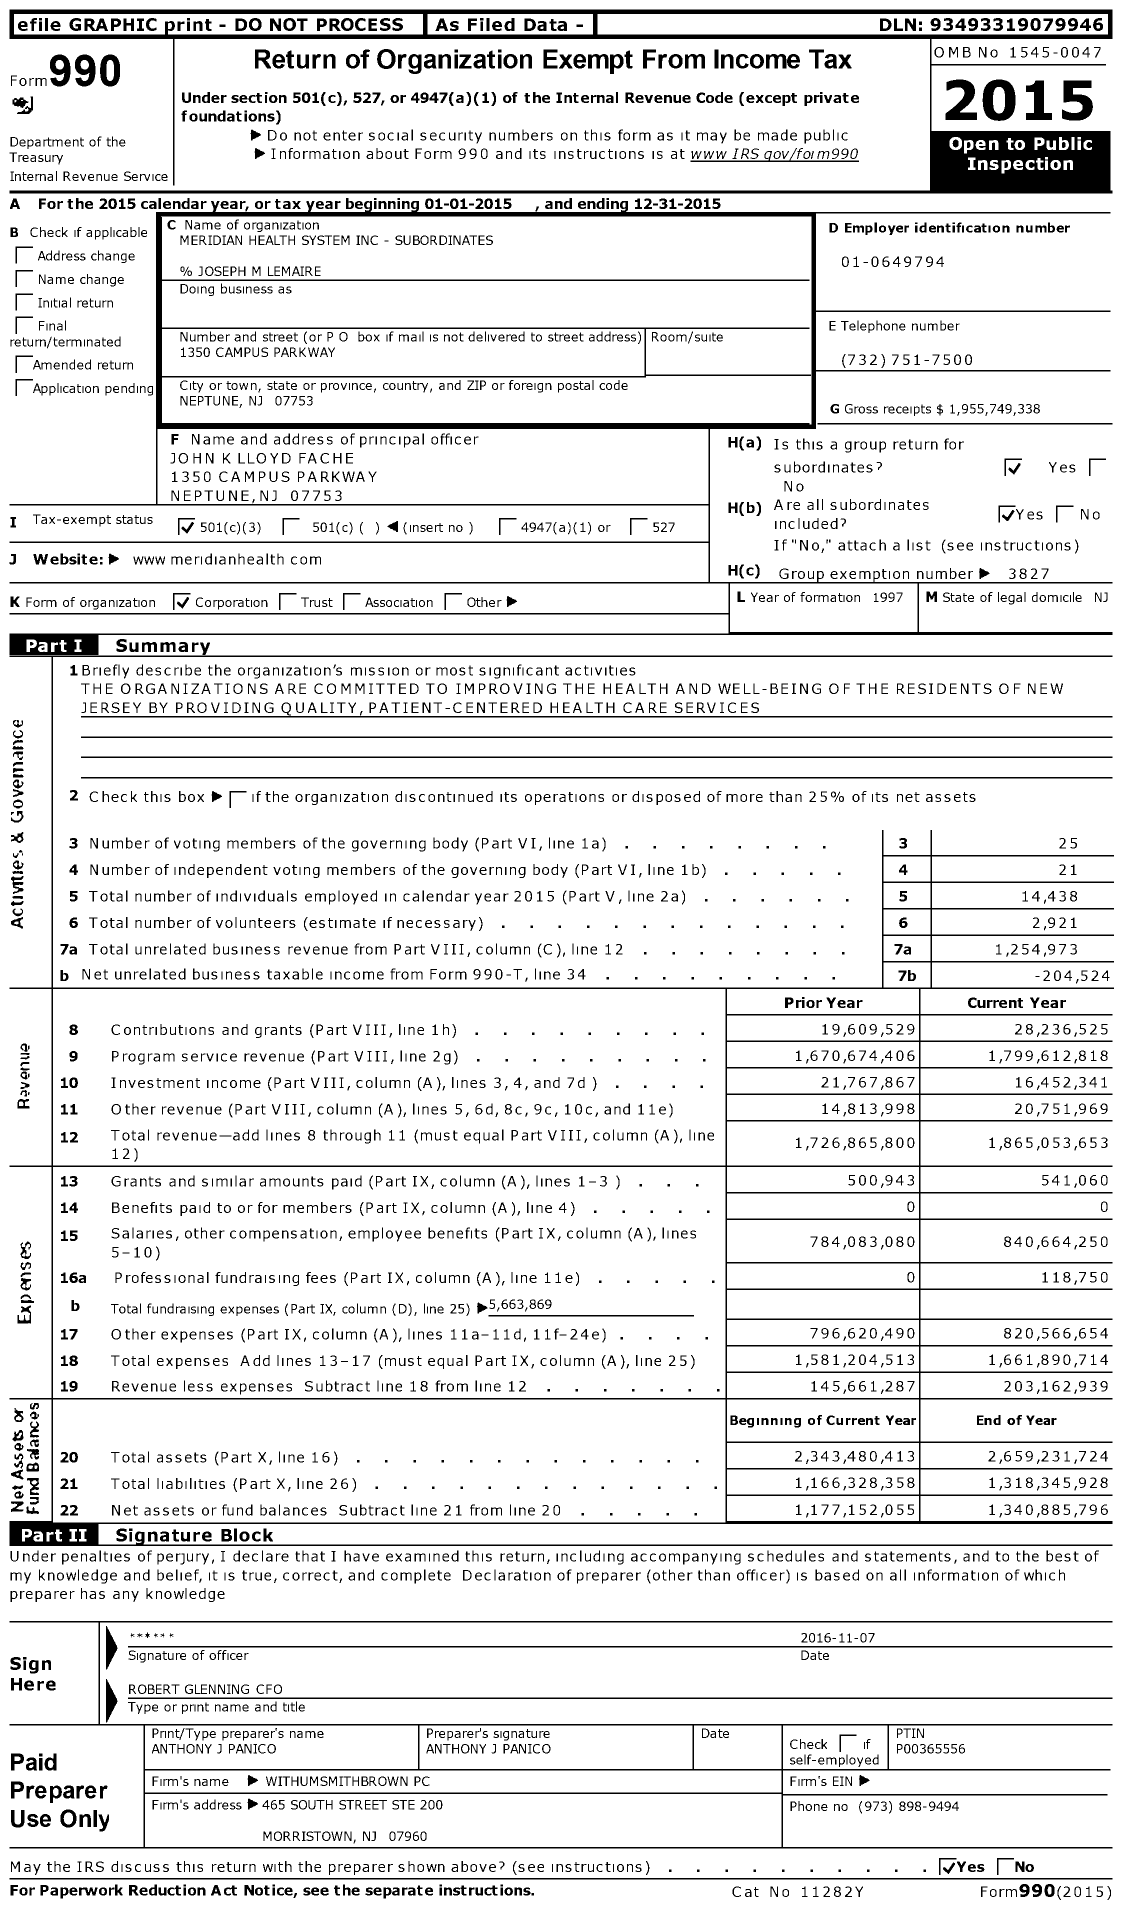 Image of first page of 2015 Form 990 for Hackensack Meridian Health -subordinates (HMH)